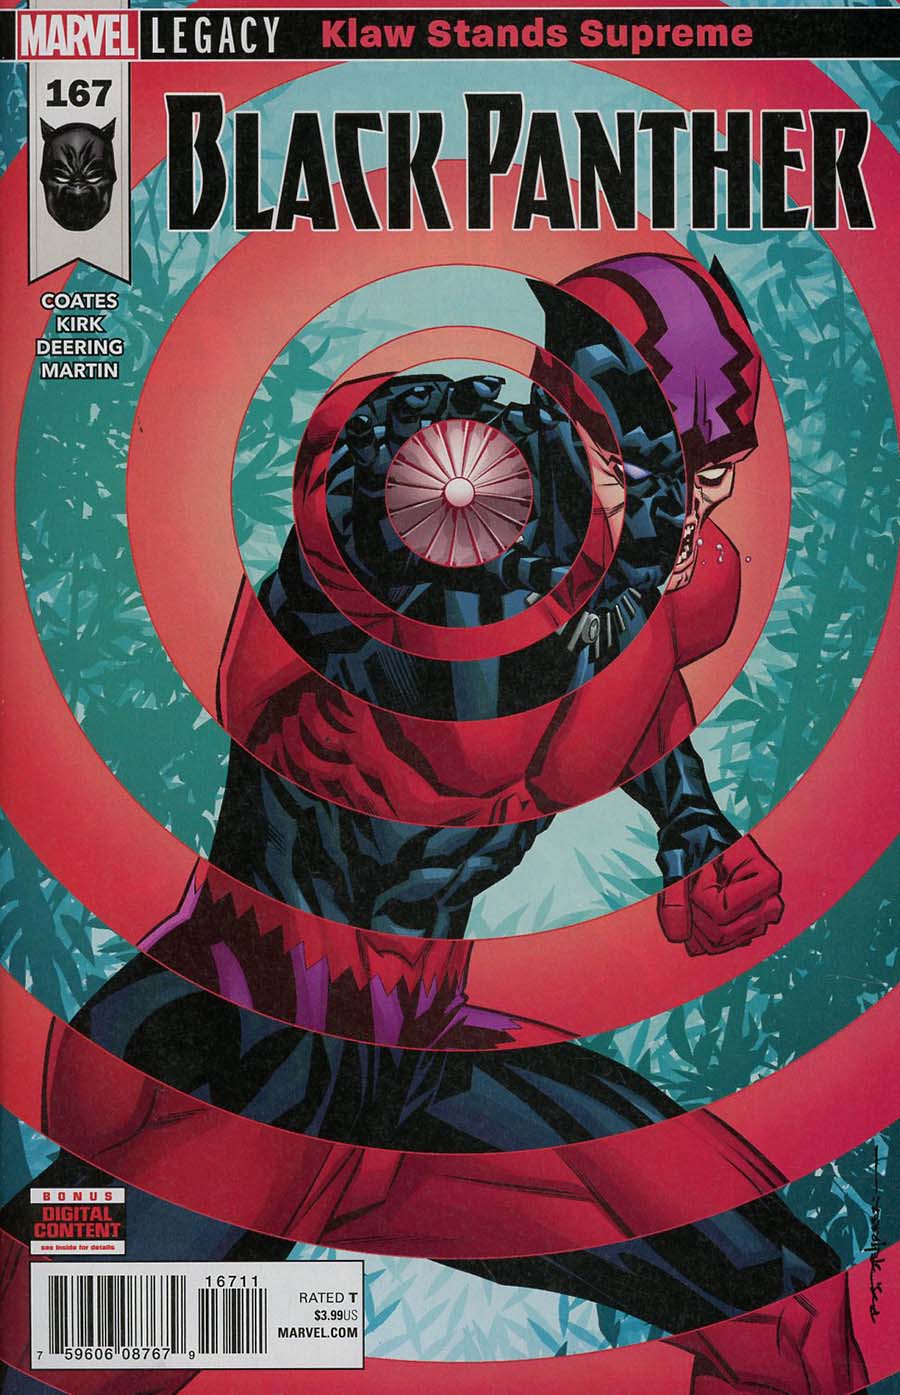 Black Panther Vol 6 #167 Cover A 1st Ptg Regular Brian Stelfreeze Cover (Marvel Legacy Tie-In)